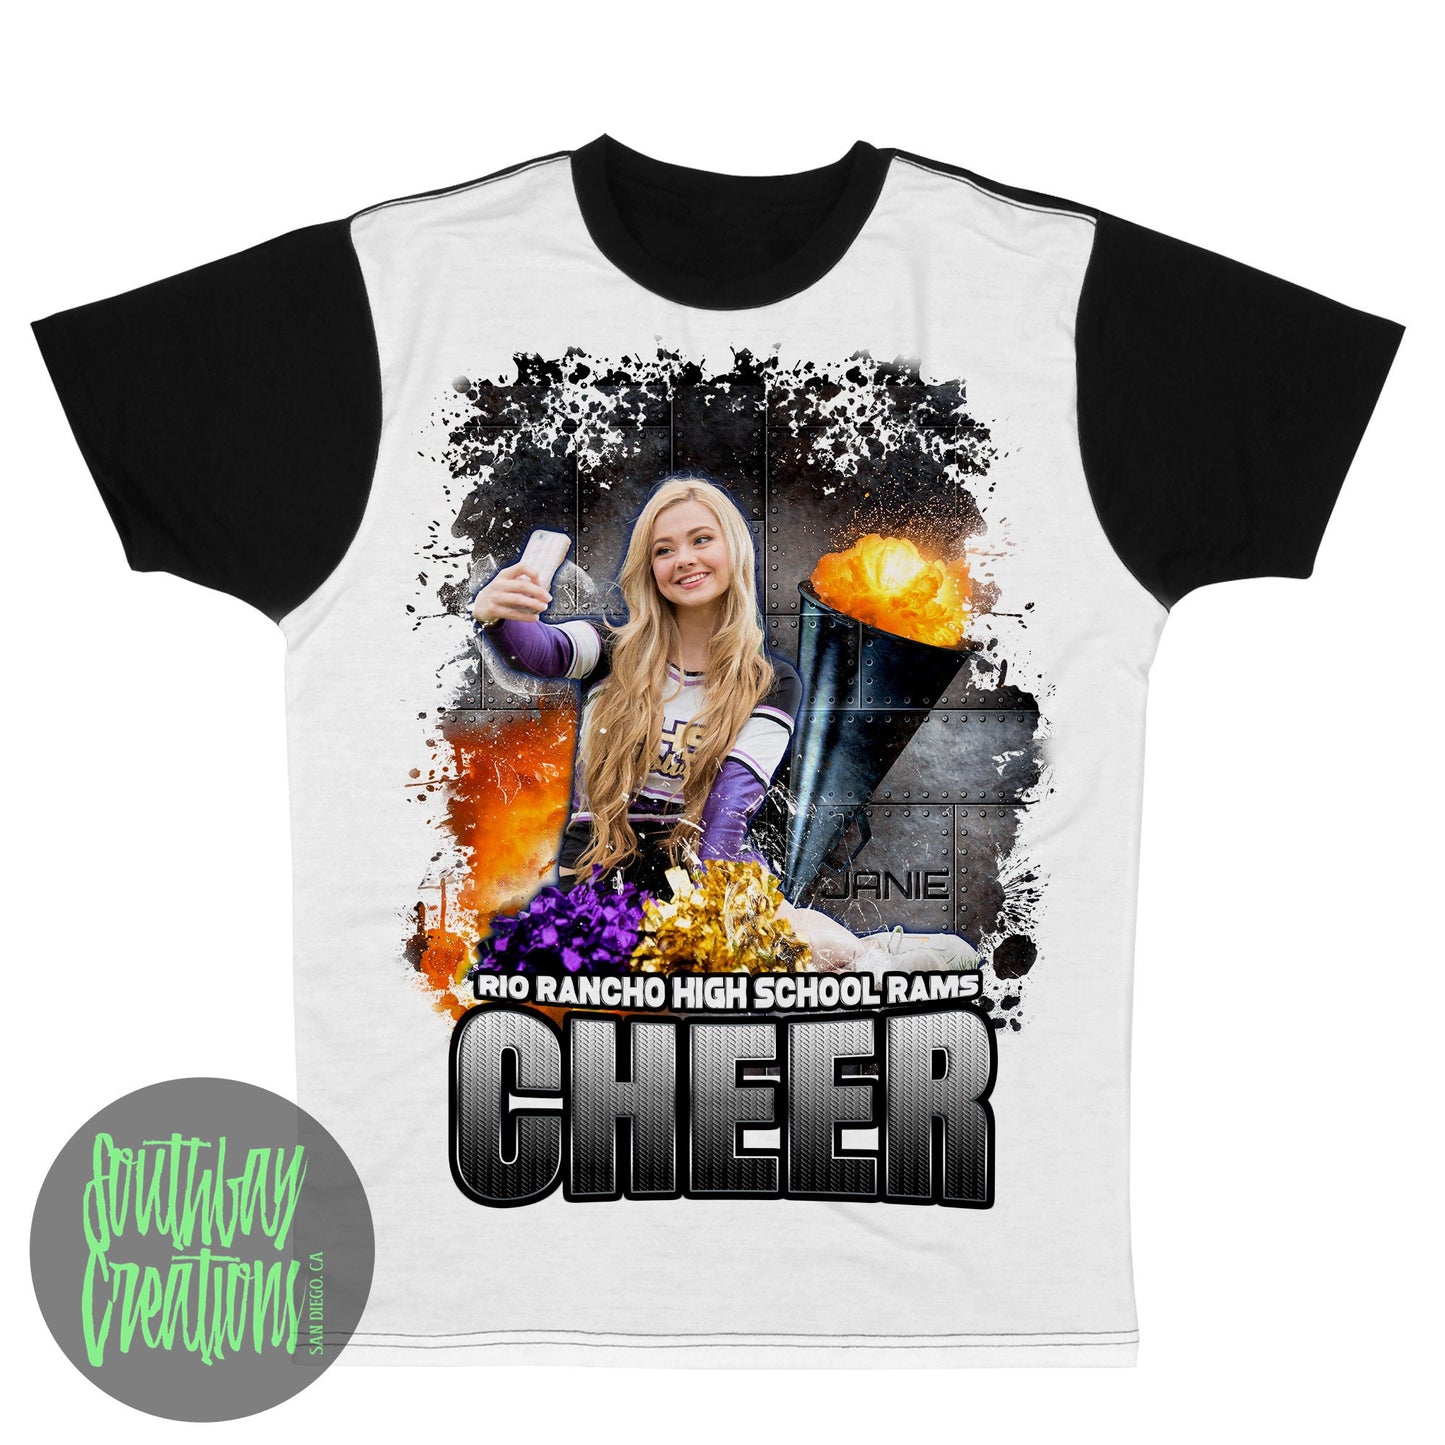 Custom Cheerleading Photo T-Shirt for Family and Friends - Personalized Senior Cheer Shirt in XS-5XL Sizes - Ideal for Game Day!